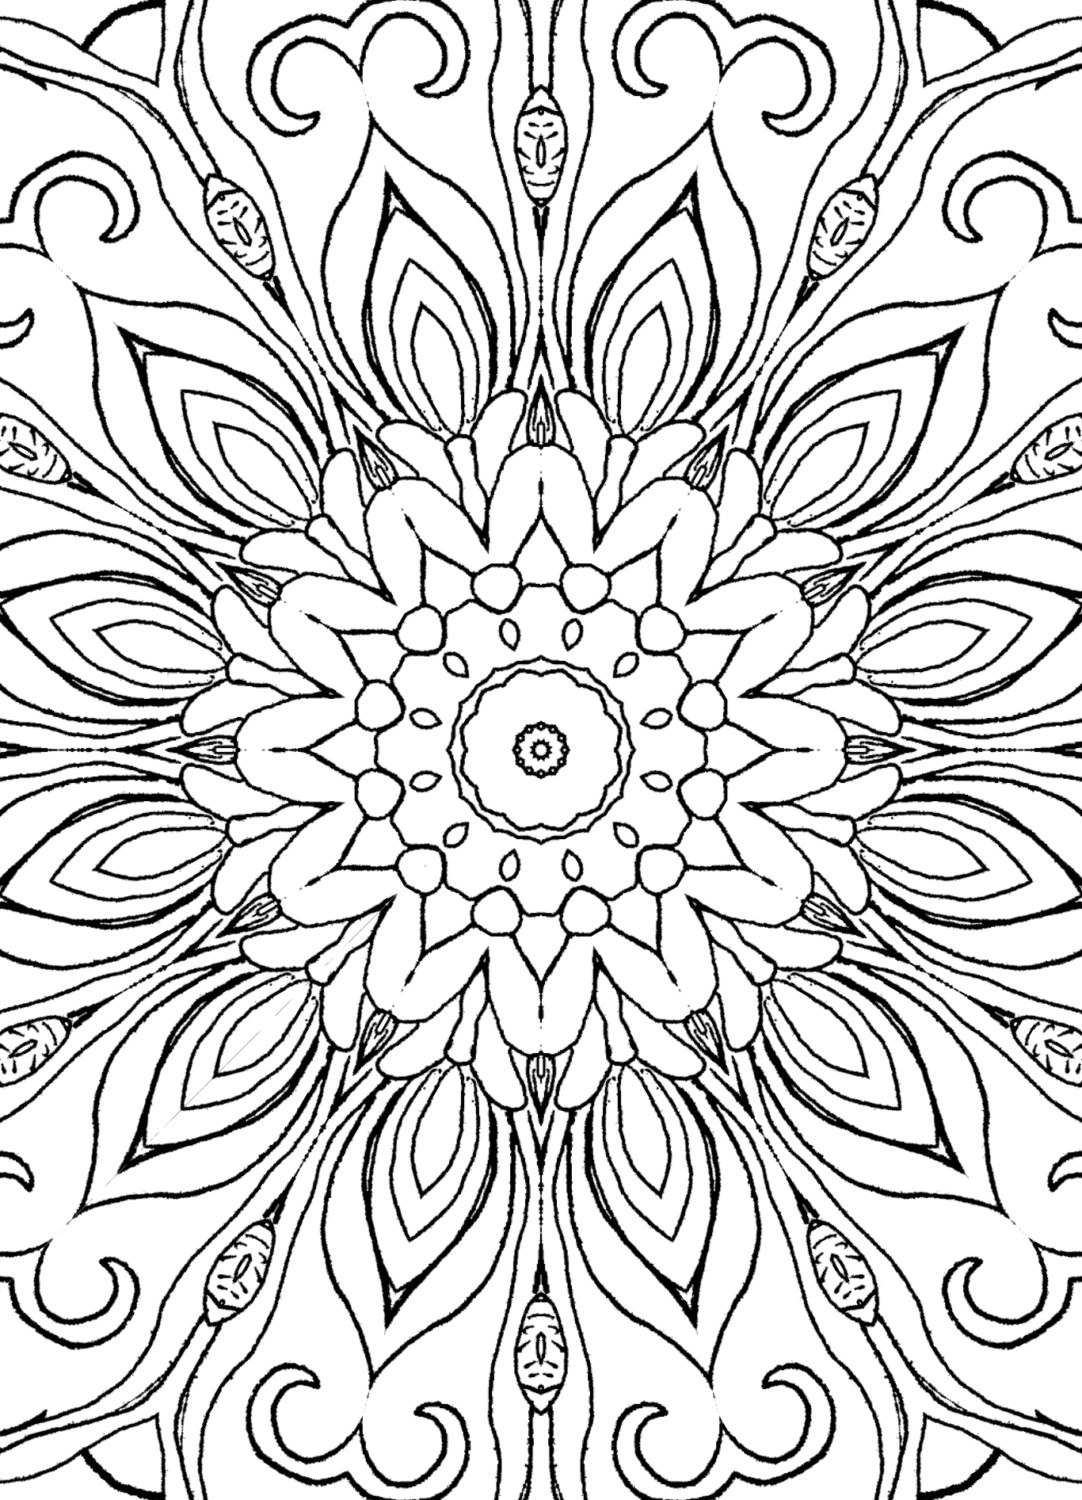 Adult Coloring Book Patterns
 25 Coloring Pages including Mandalas Geometric Designs Rug